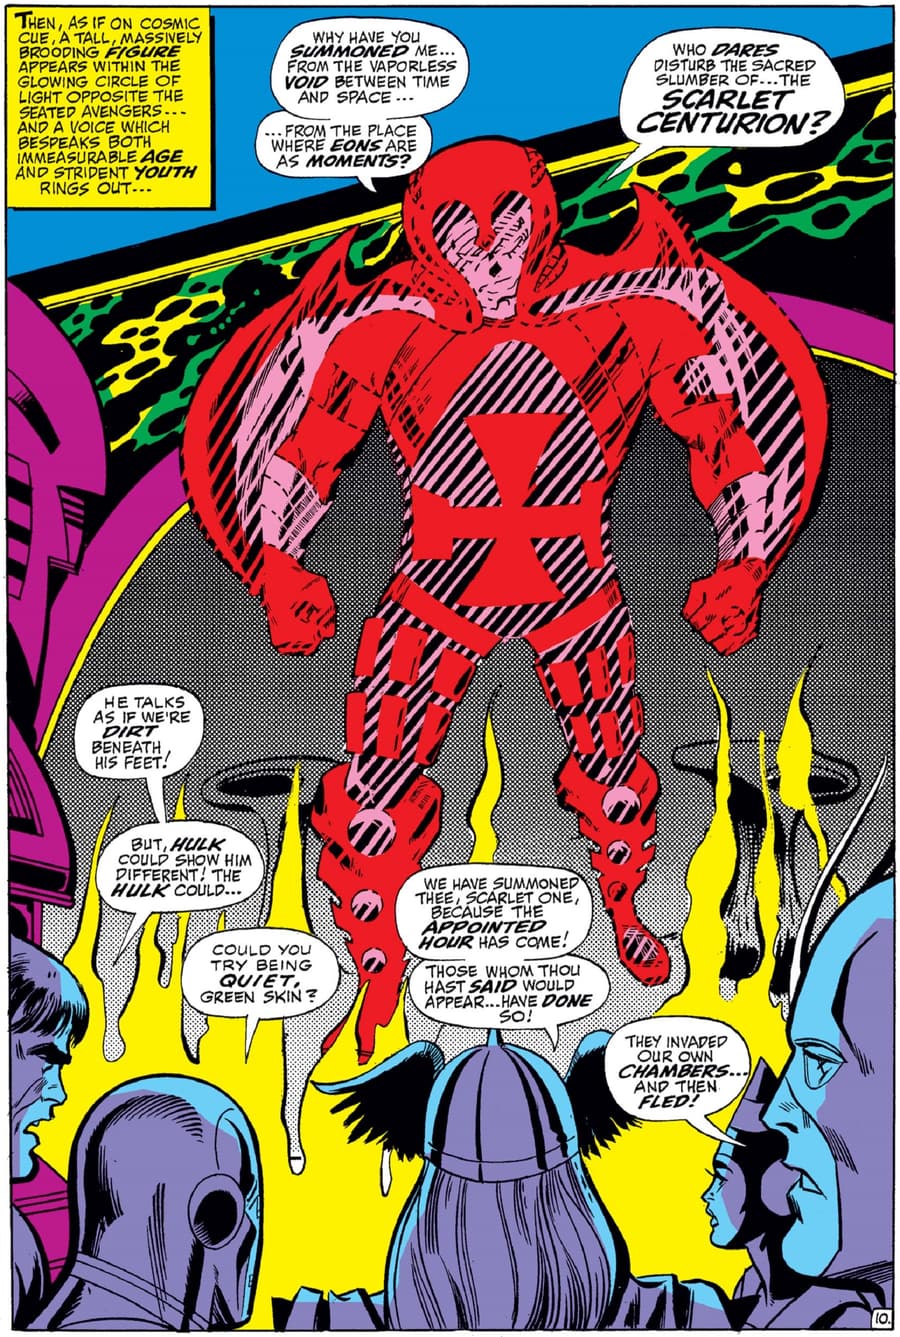 The Earth-689 Scarlet Centurion in AVENGERS ANNUAL (1967) #2.